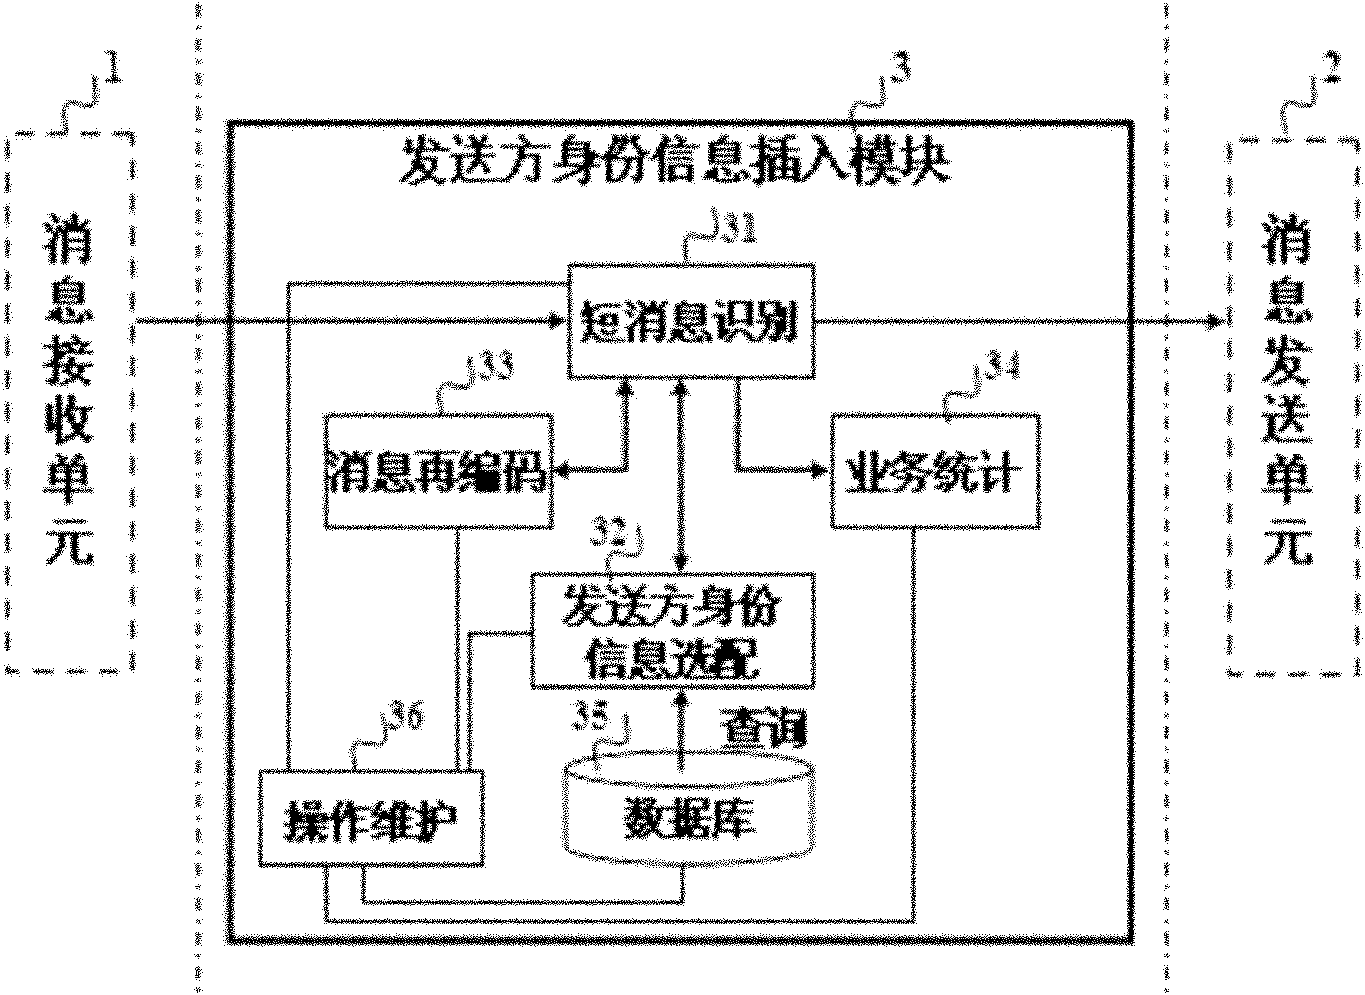 Device for inserting sender identify information into short message